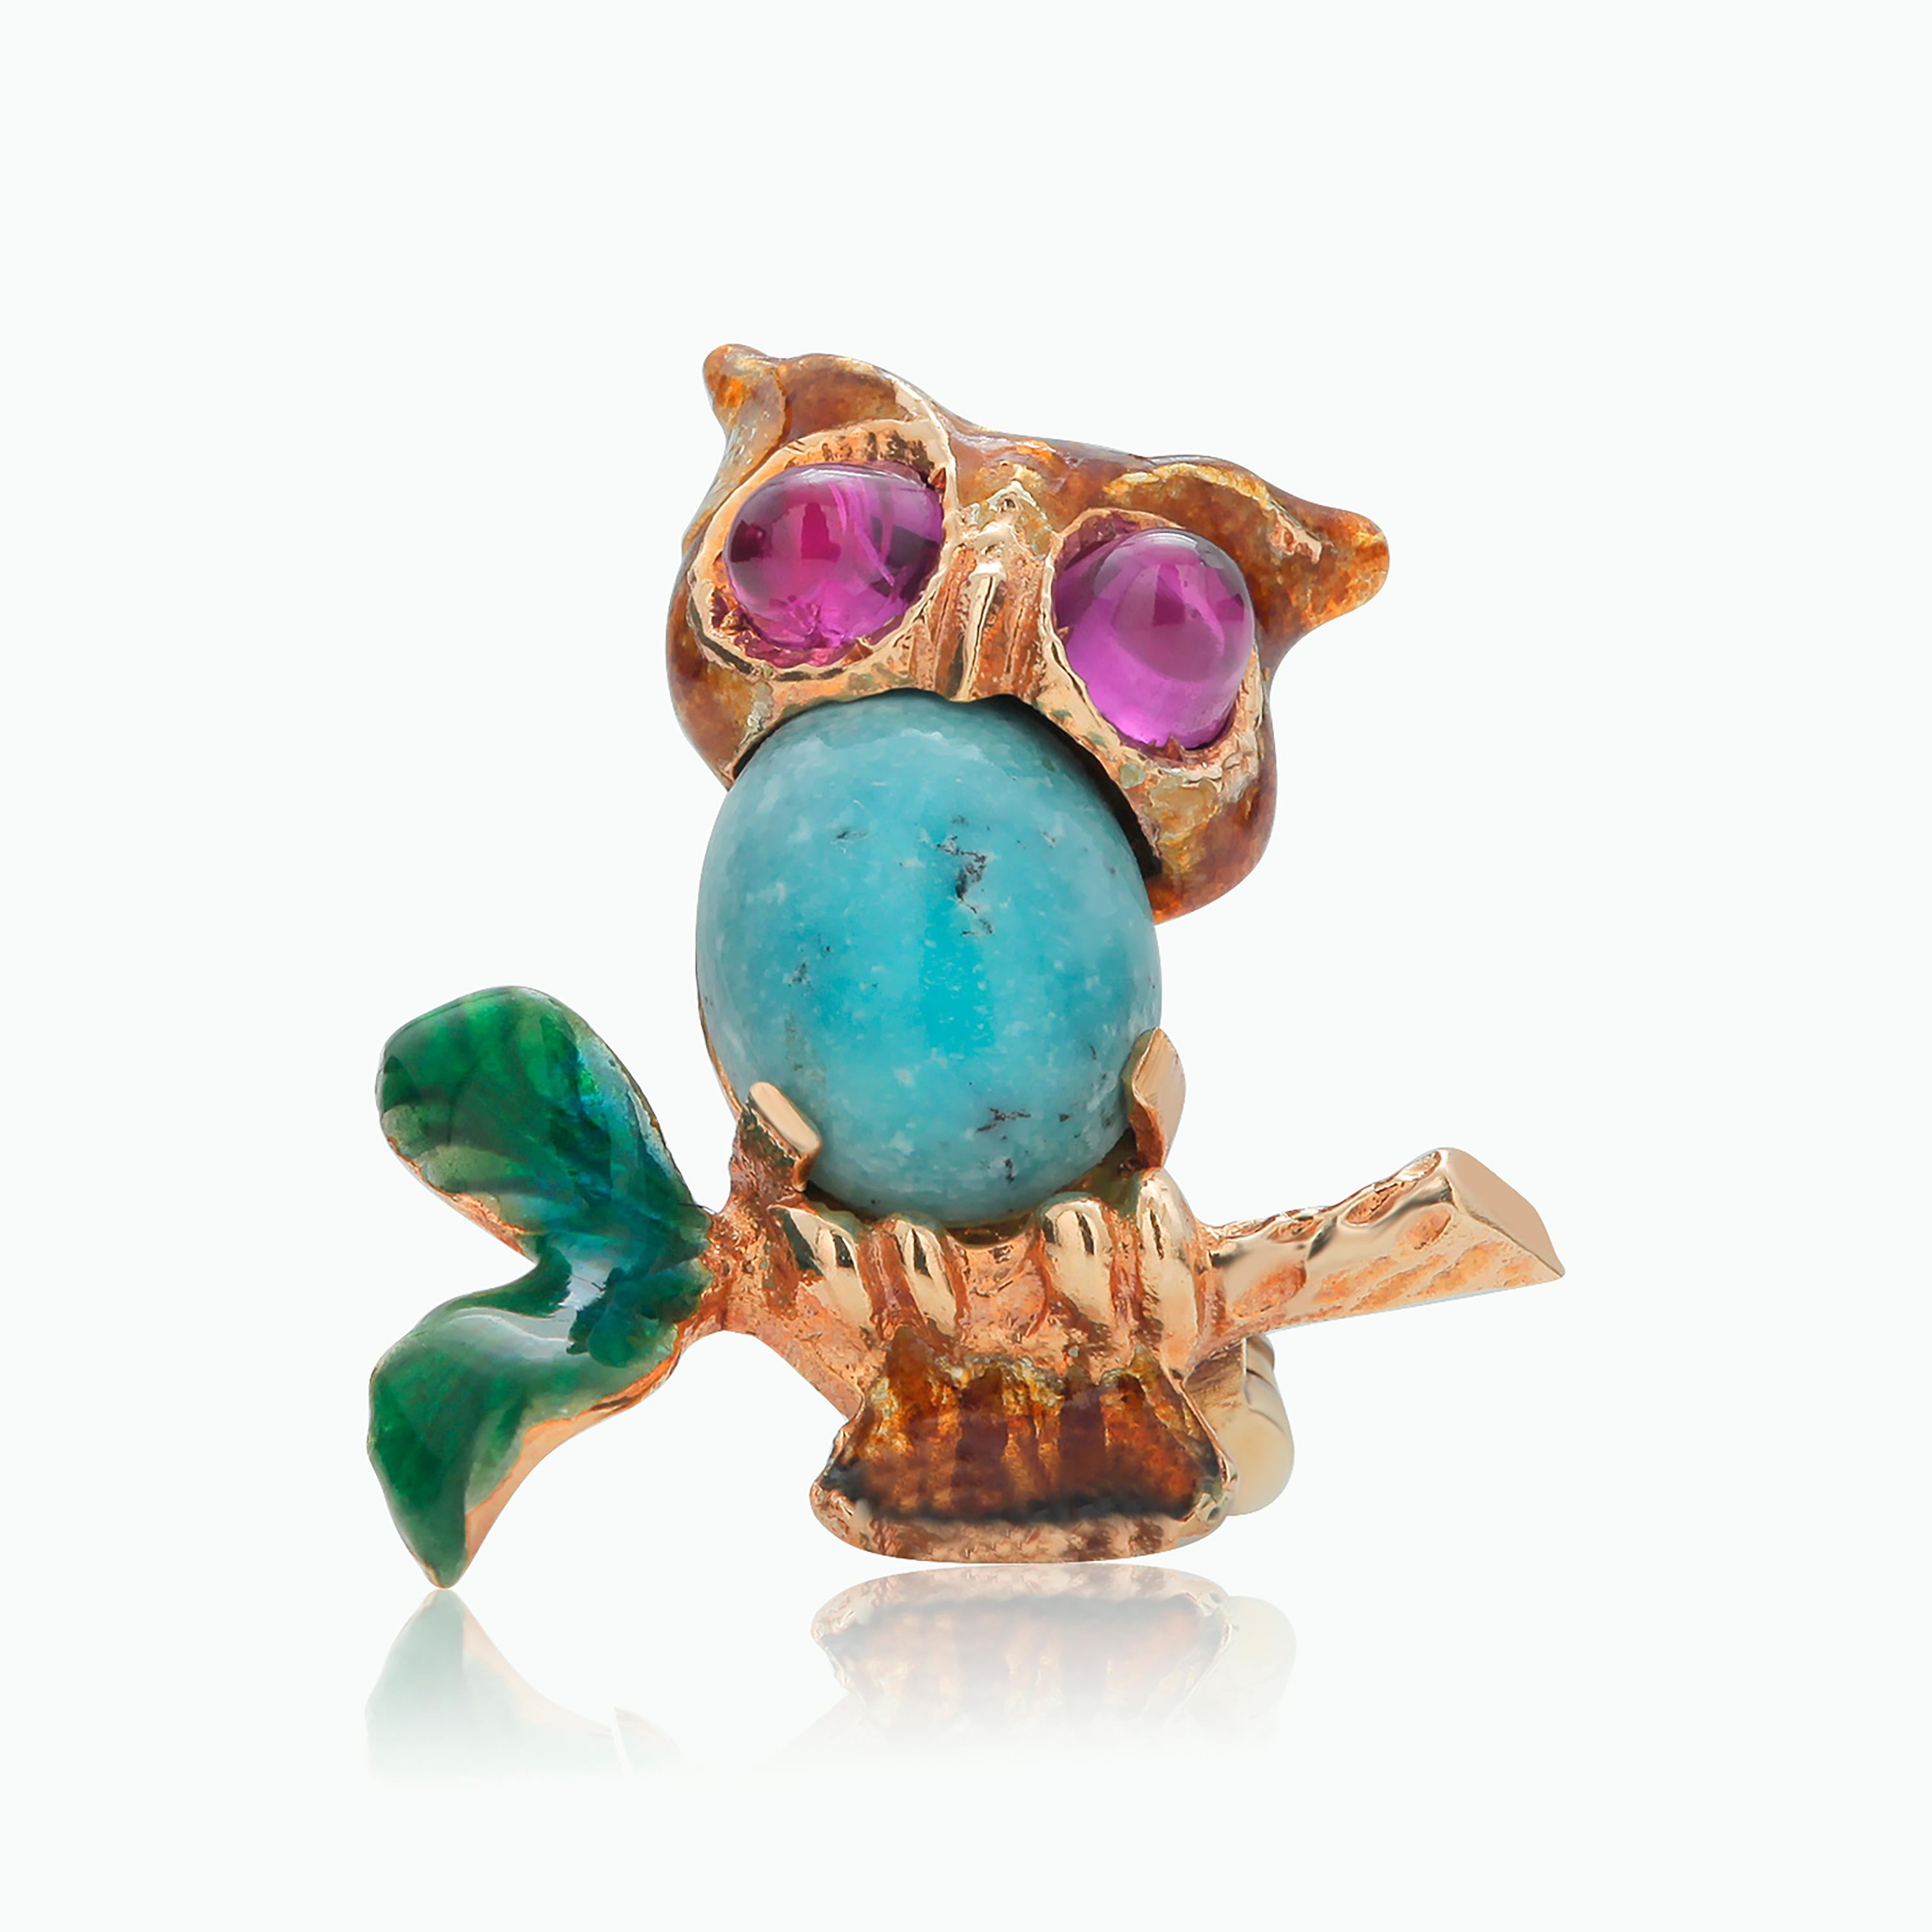 Romantic Rare 14 Karat Yellow Gold Ruby Turquoise Enamel Owl Brooch 0.80 Inch Long For Sale